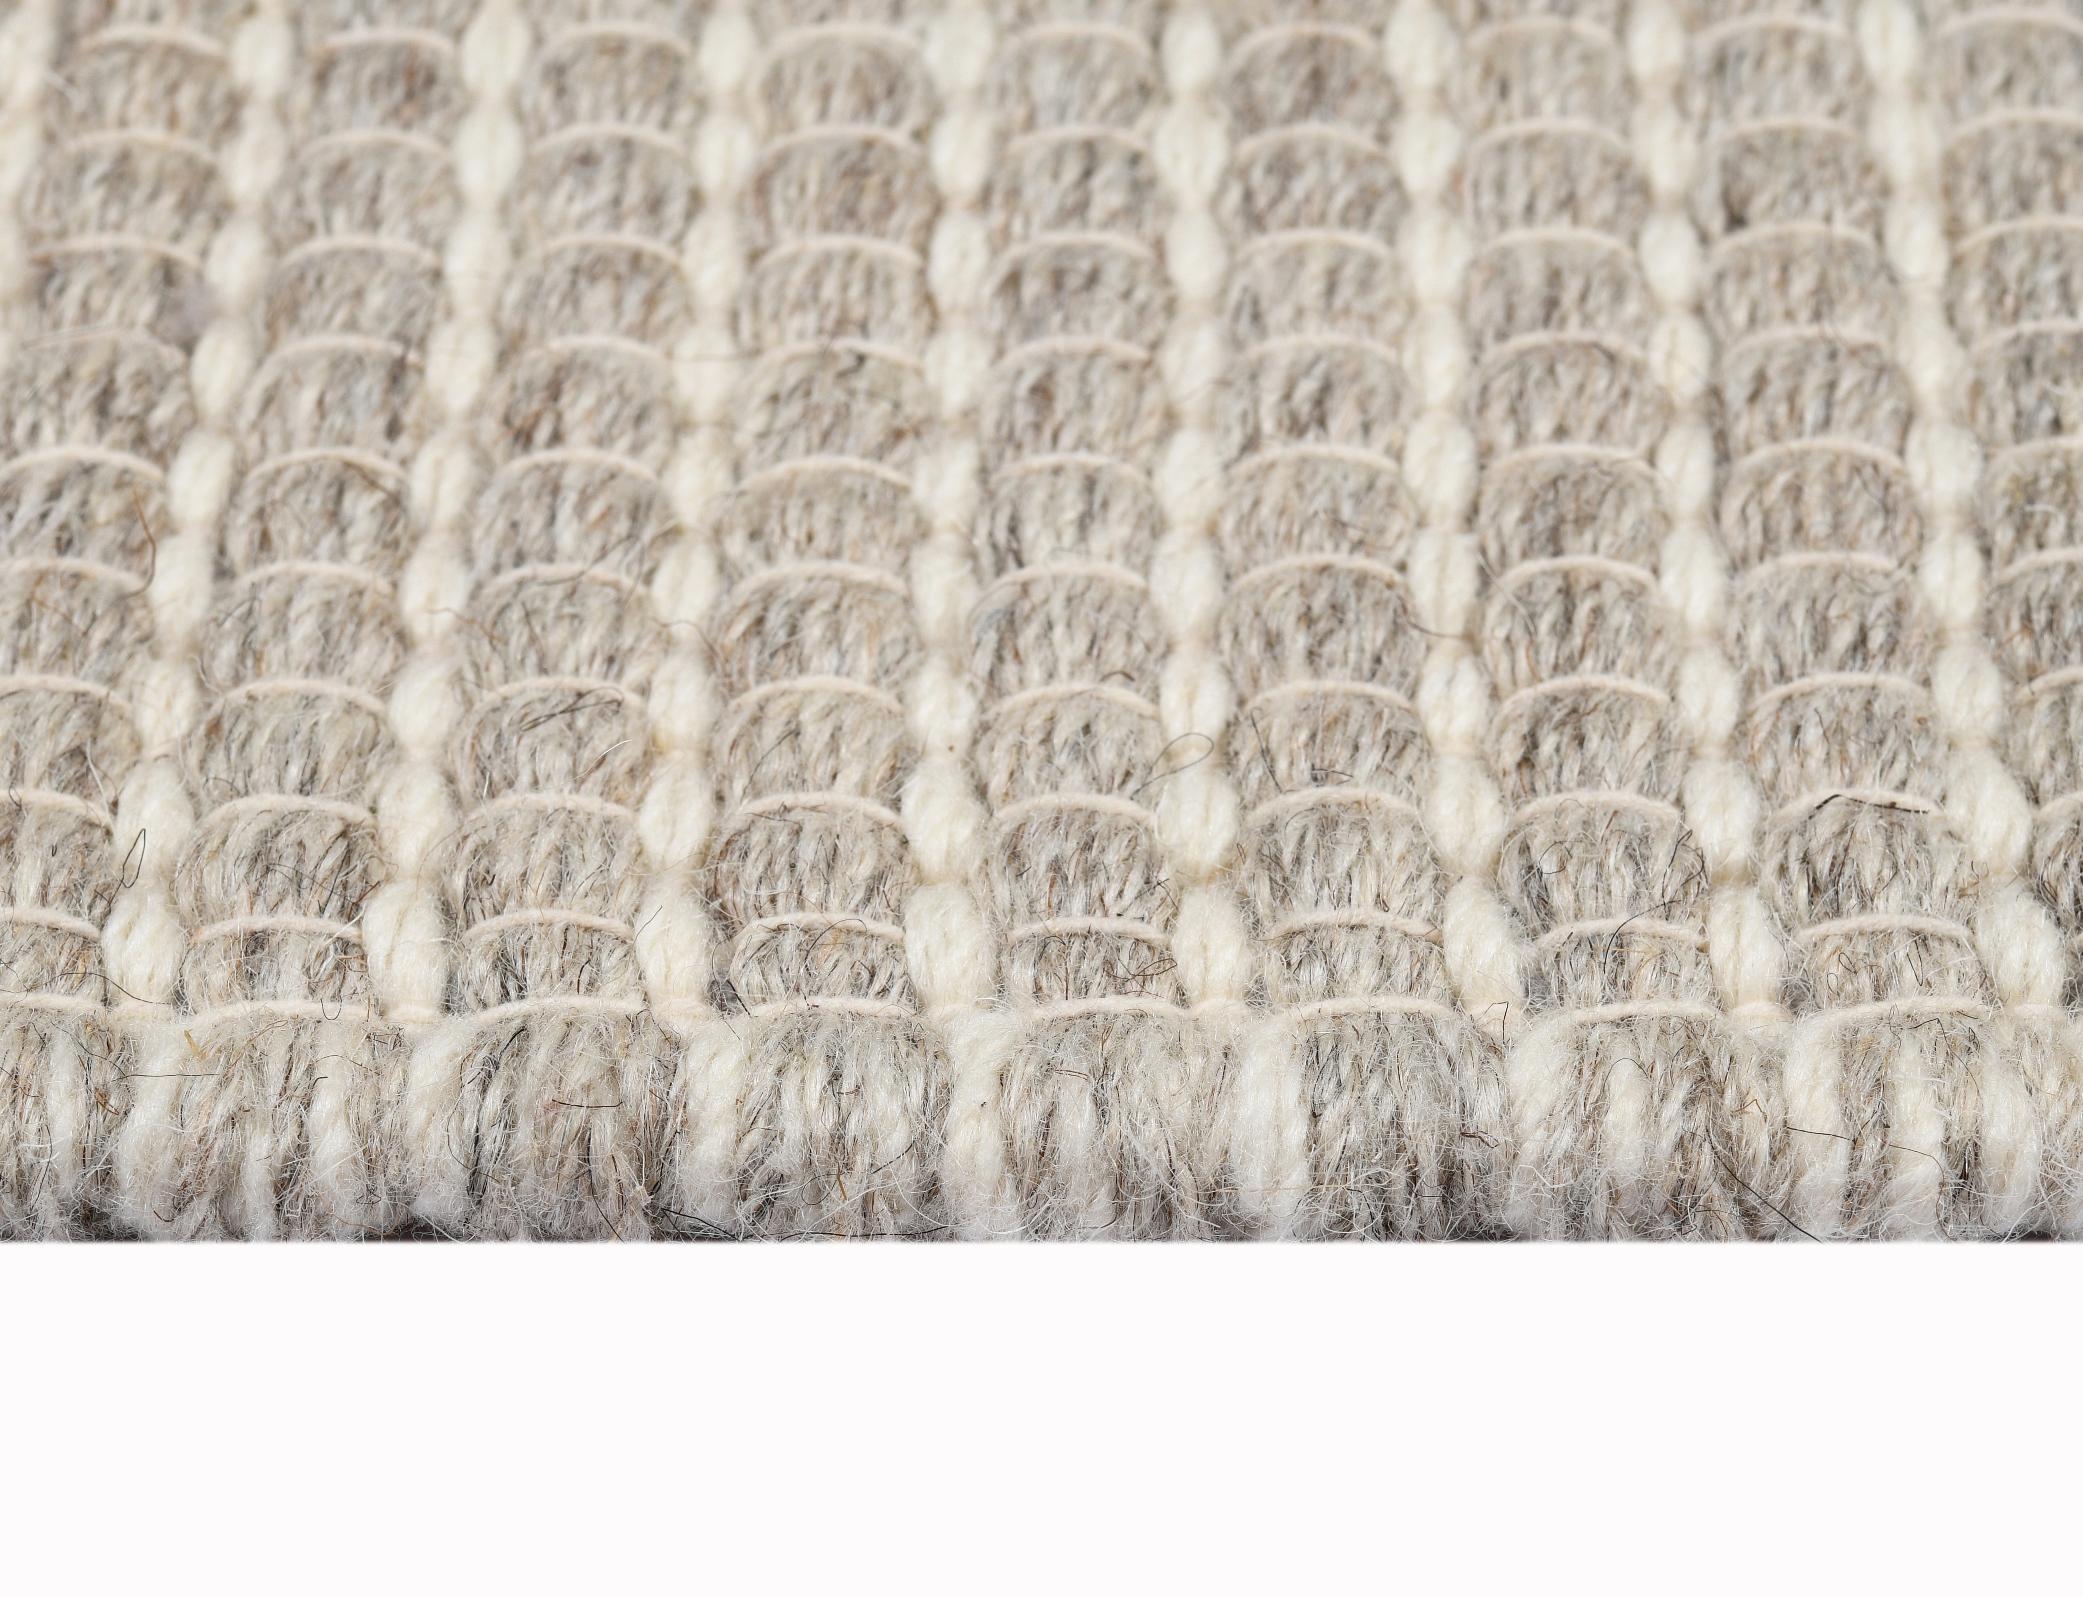 Indian Lex, Ash, Handwoven Face 60% Undyed NZ Wool, 40% Undyed MED Wool, 8' x 10' For Sale